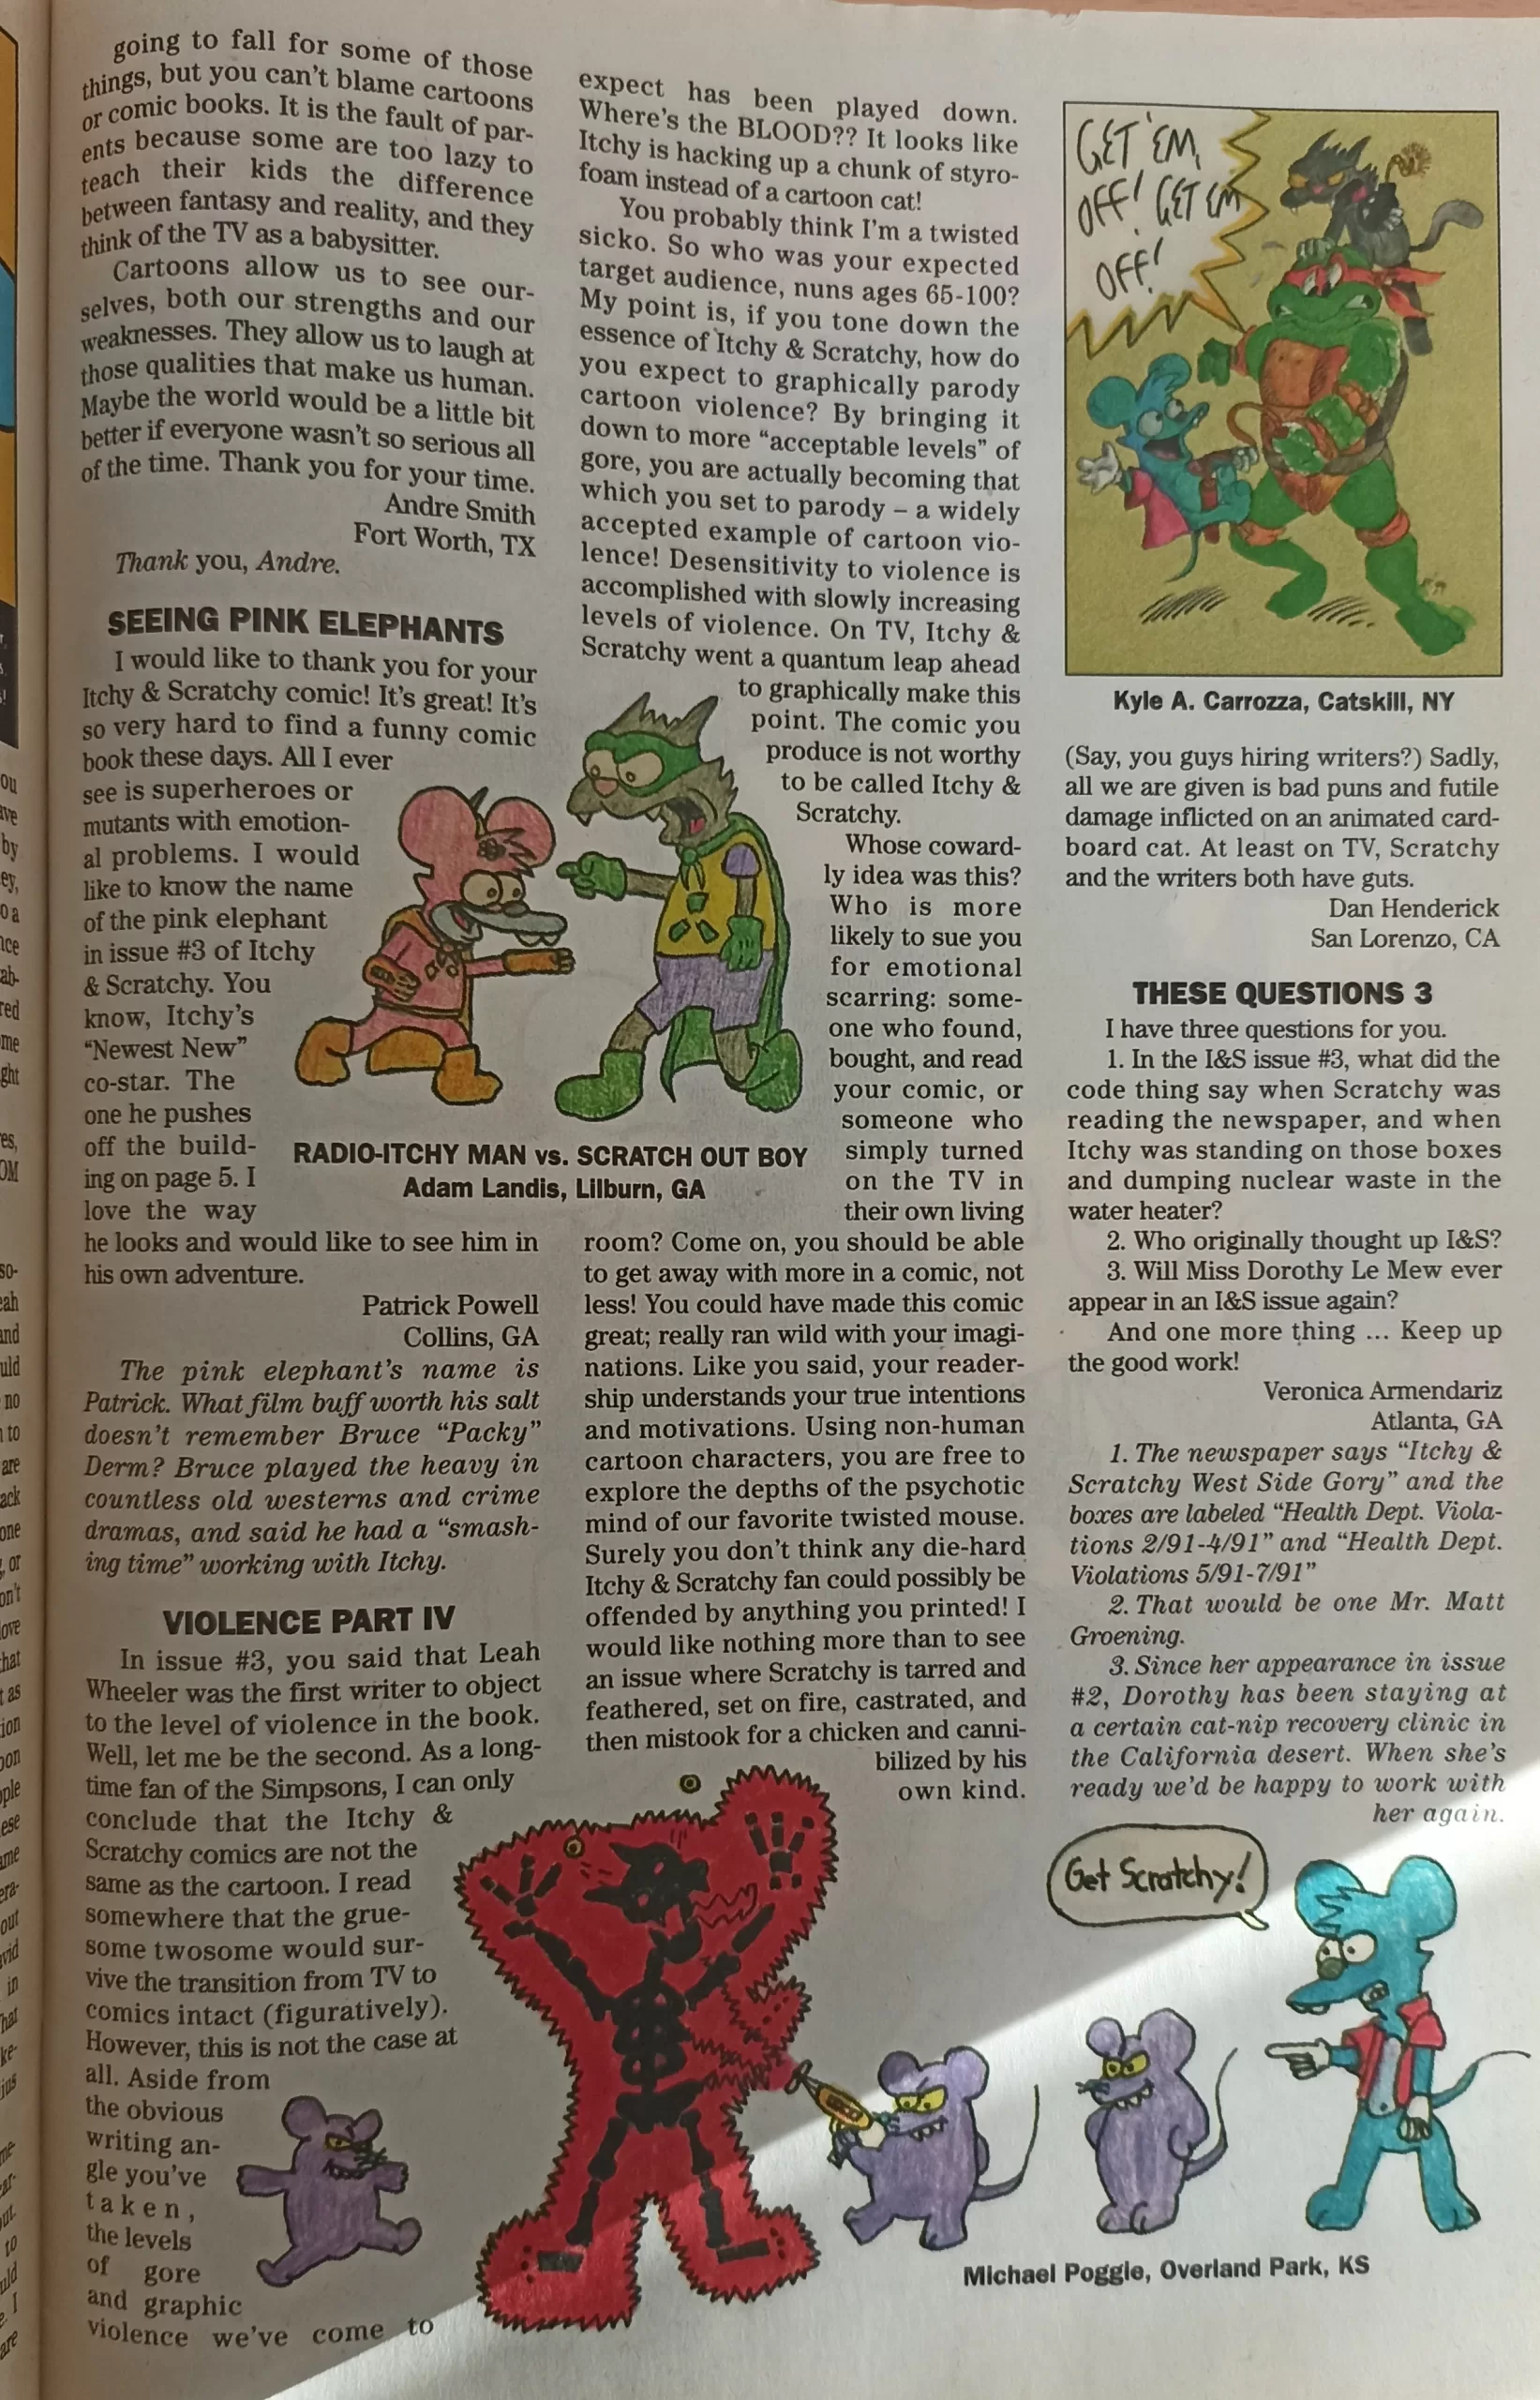 Itchy & Scratchy, letters from readers about violence in comics